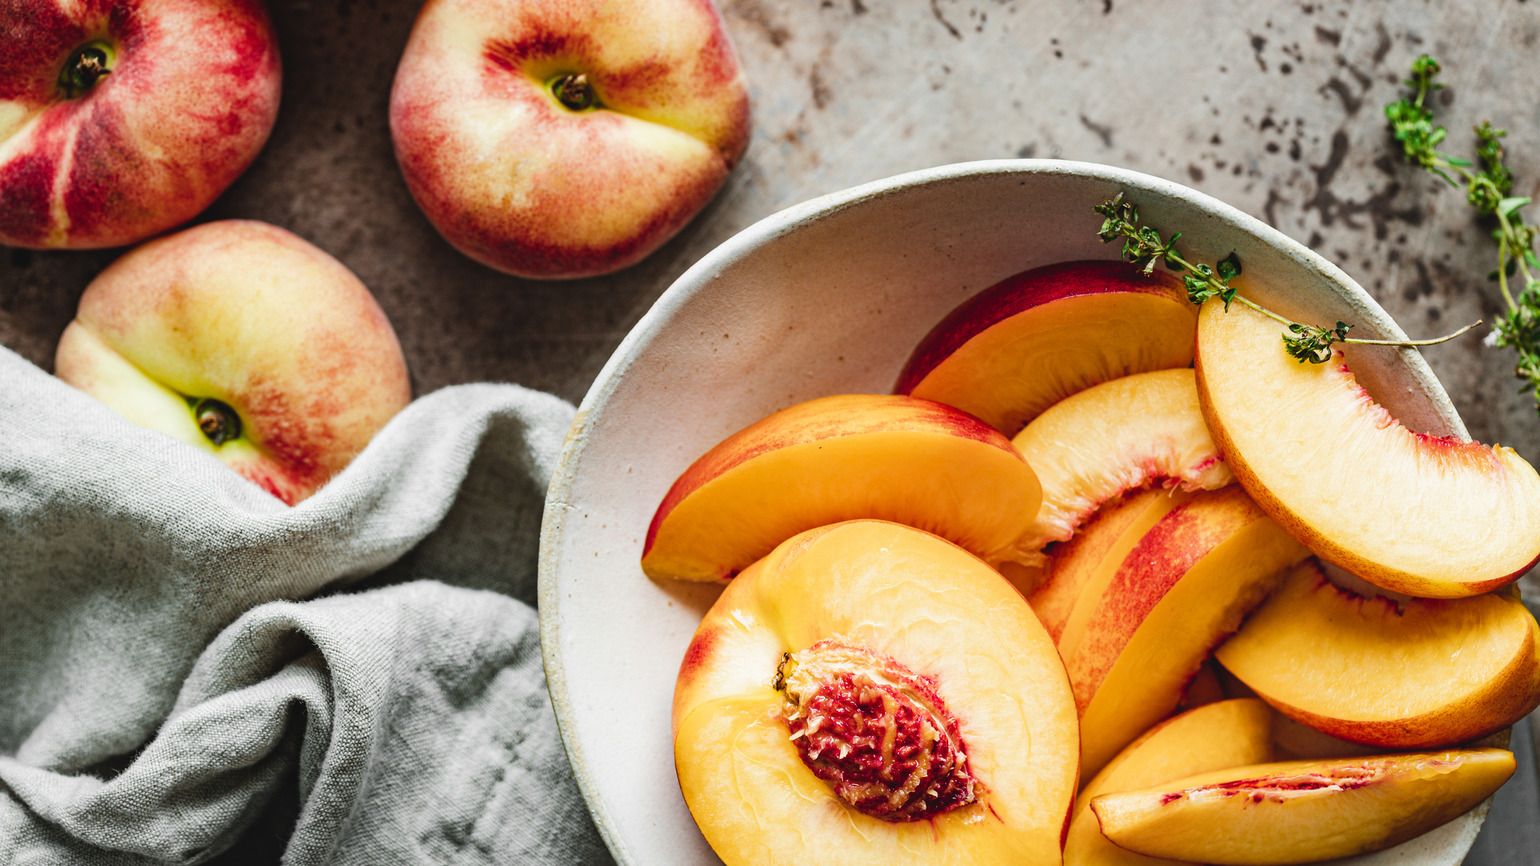 Slices of ripe peaches in a bowl (Getty Images)